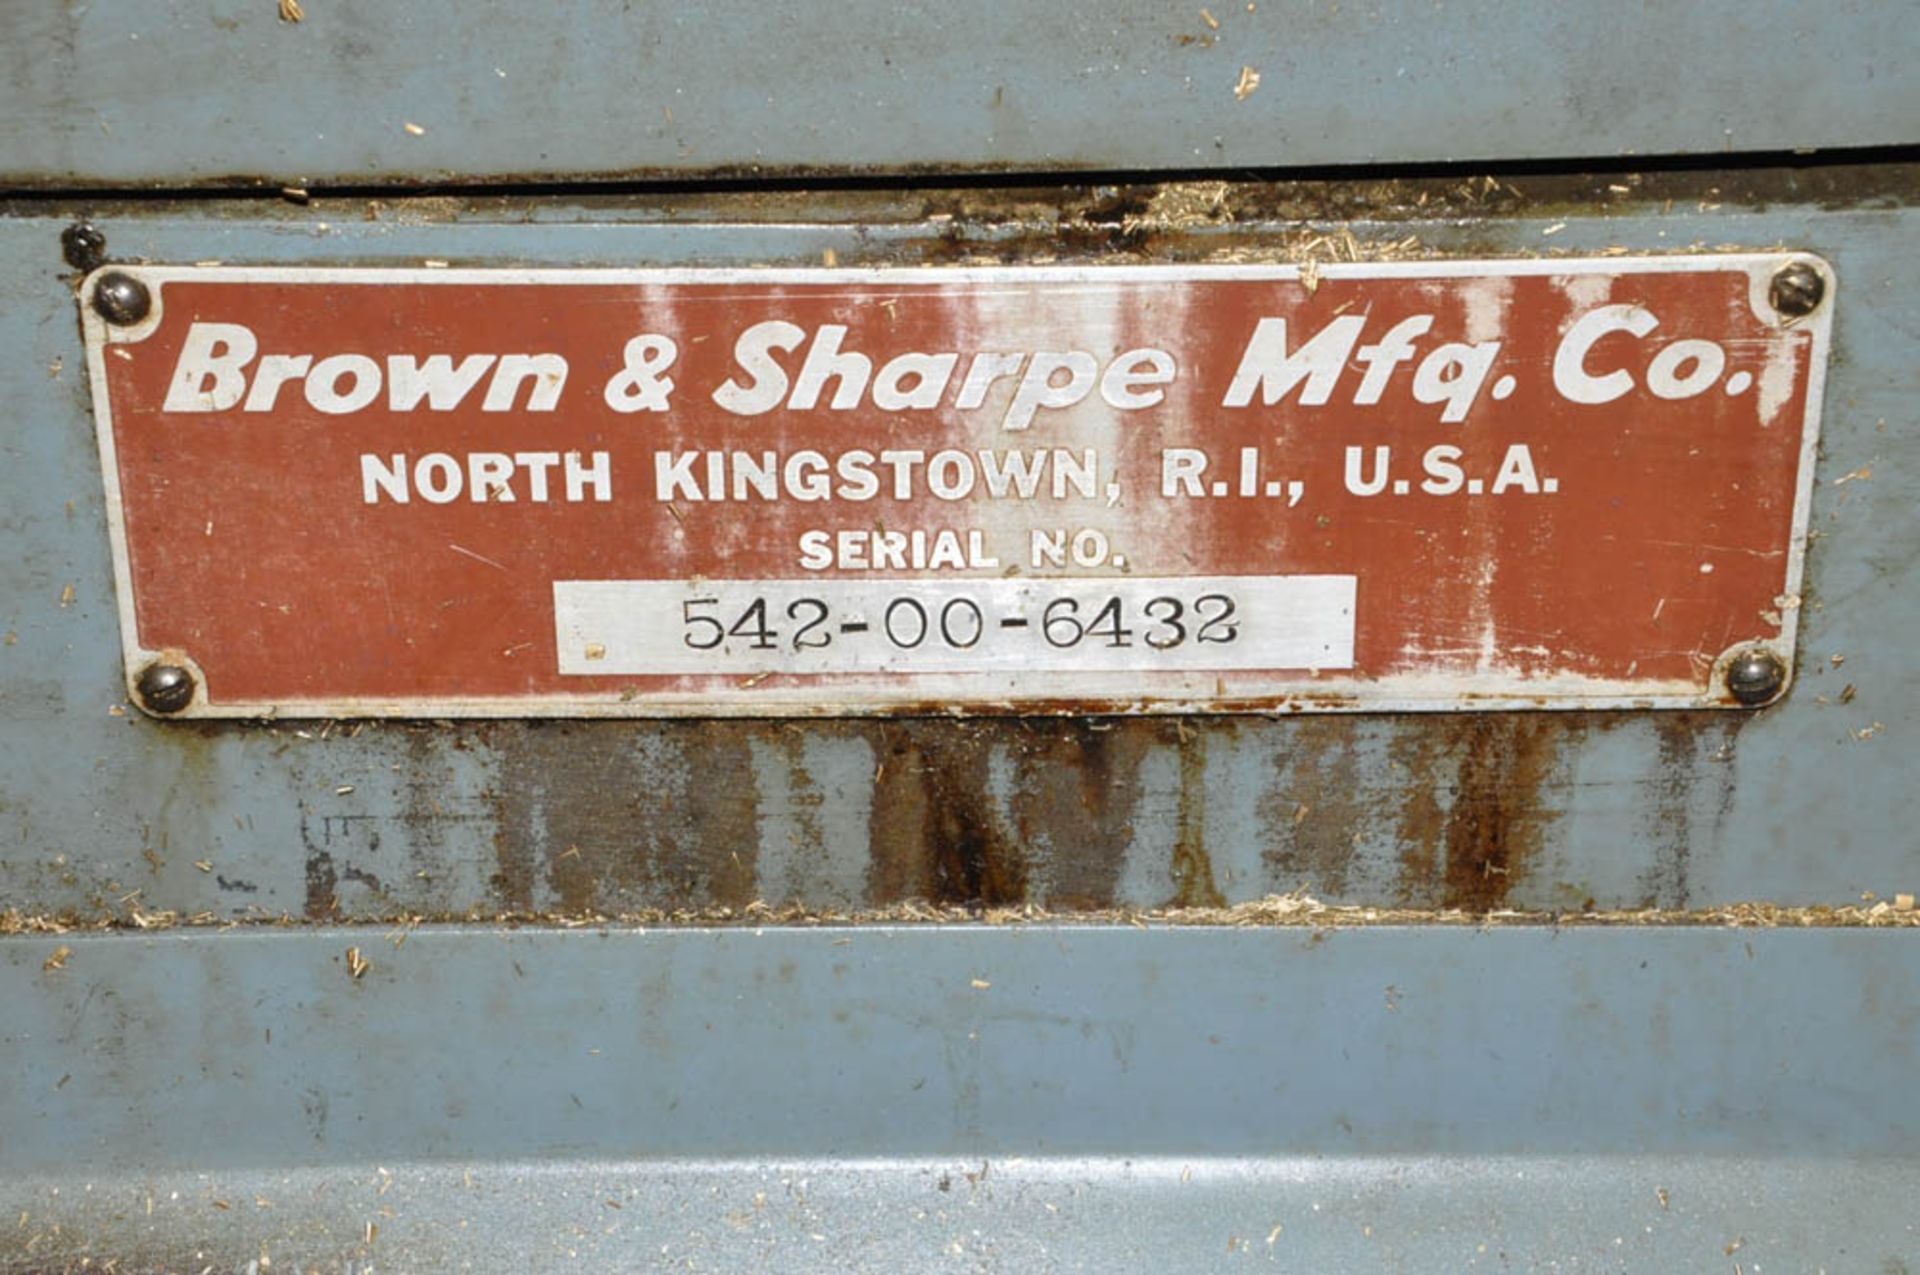 BROWN & SHARPE MDL. ULTRA, 1/2" CAPACITY AUTOMATIC SCREW MACHINE, S/N:542-00-6432, WITH SINGLE - Image 6 of 6